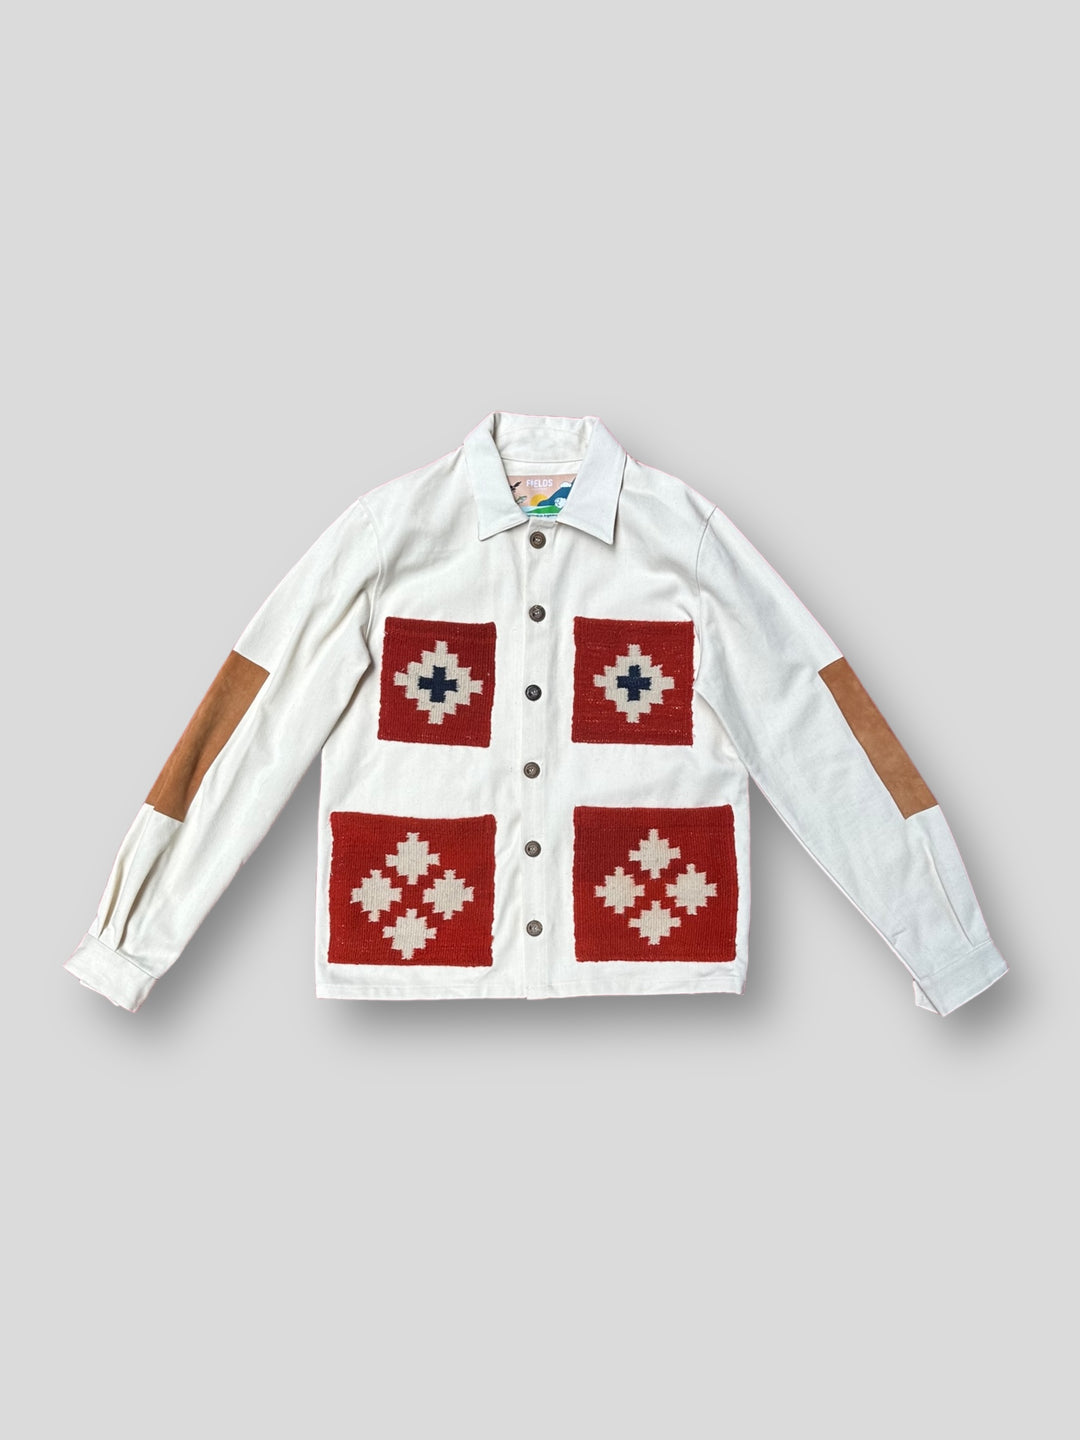 The Chacana Tapestry Jacket